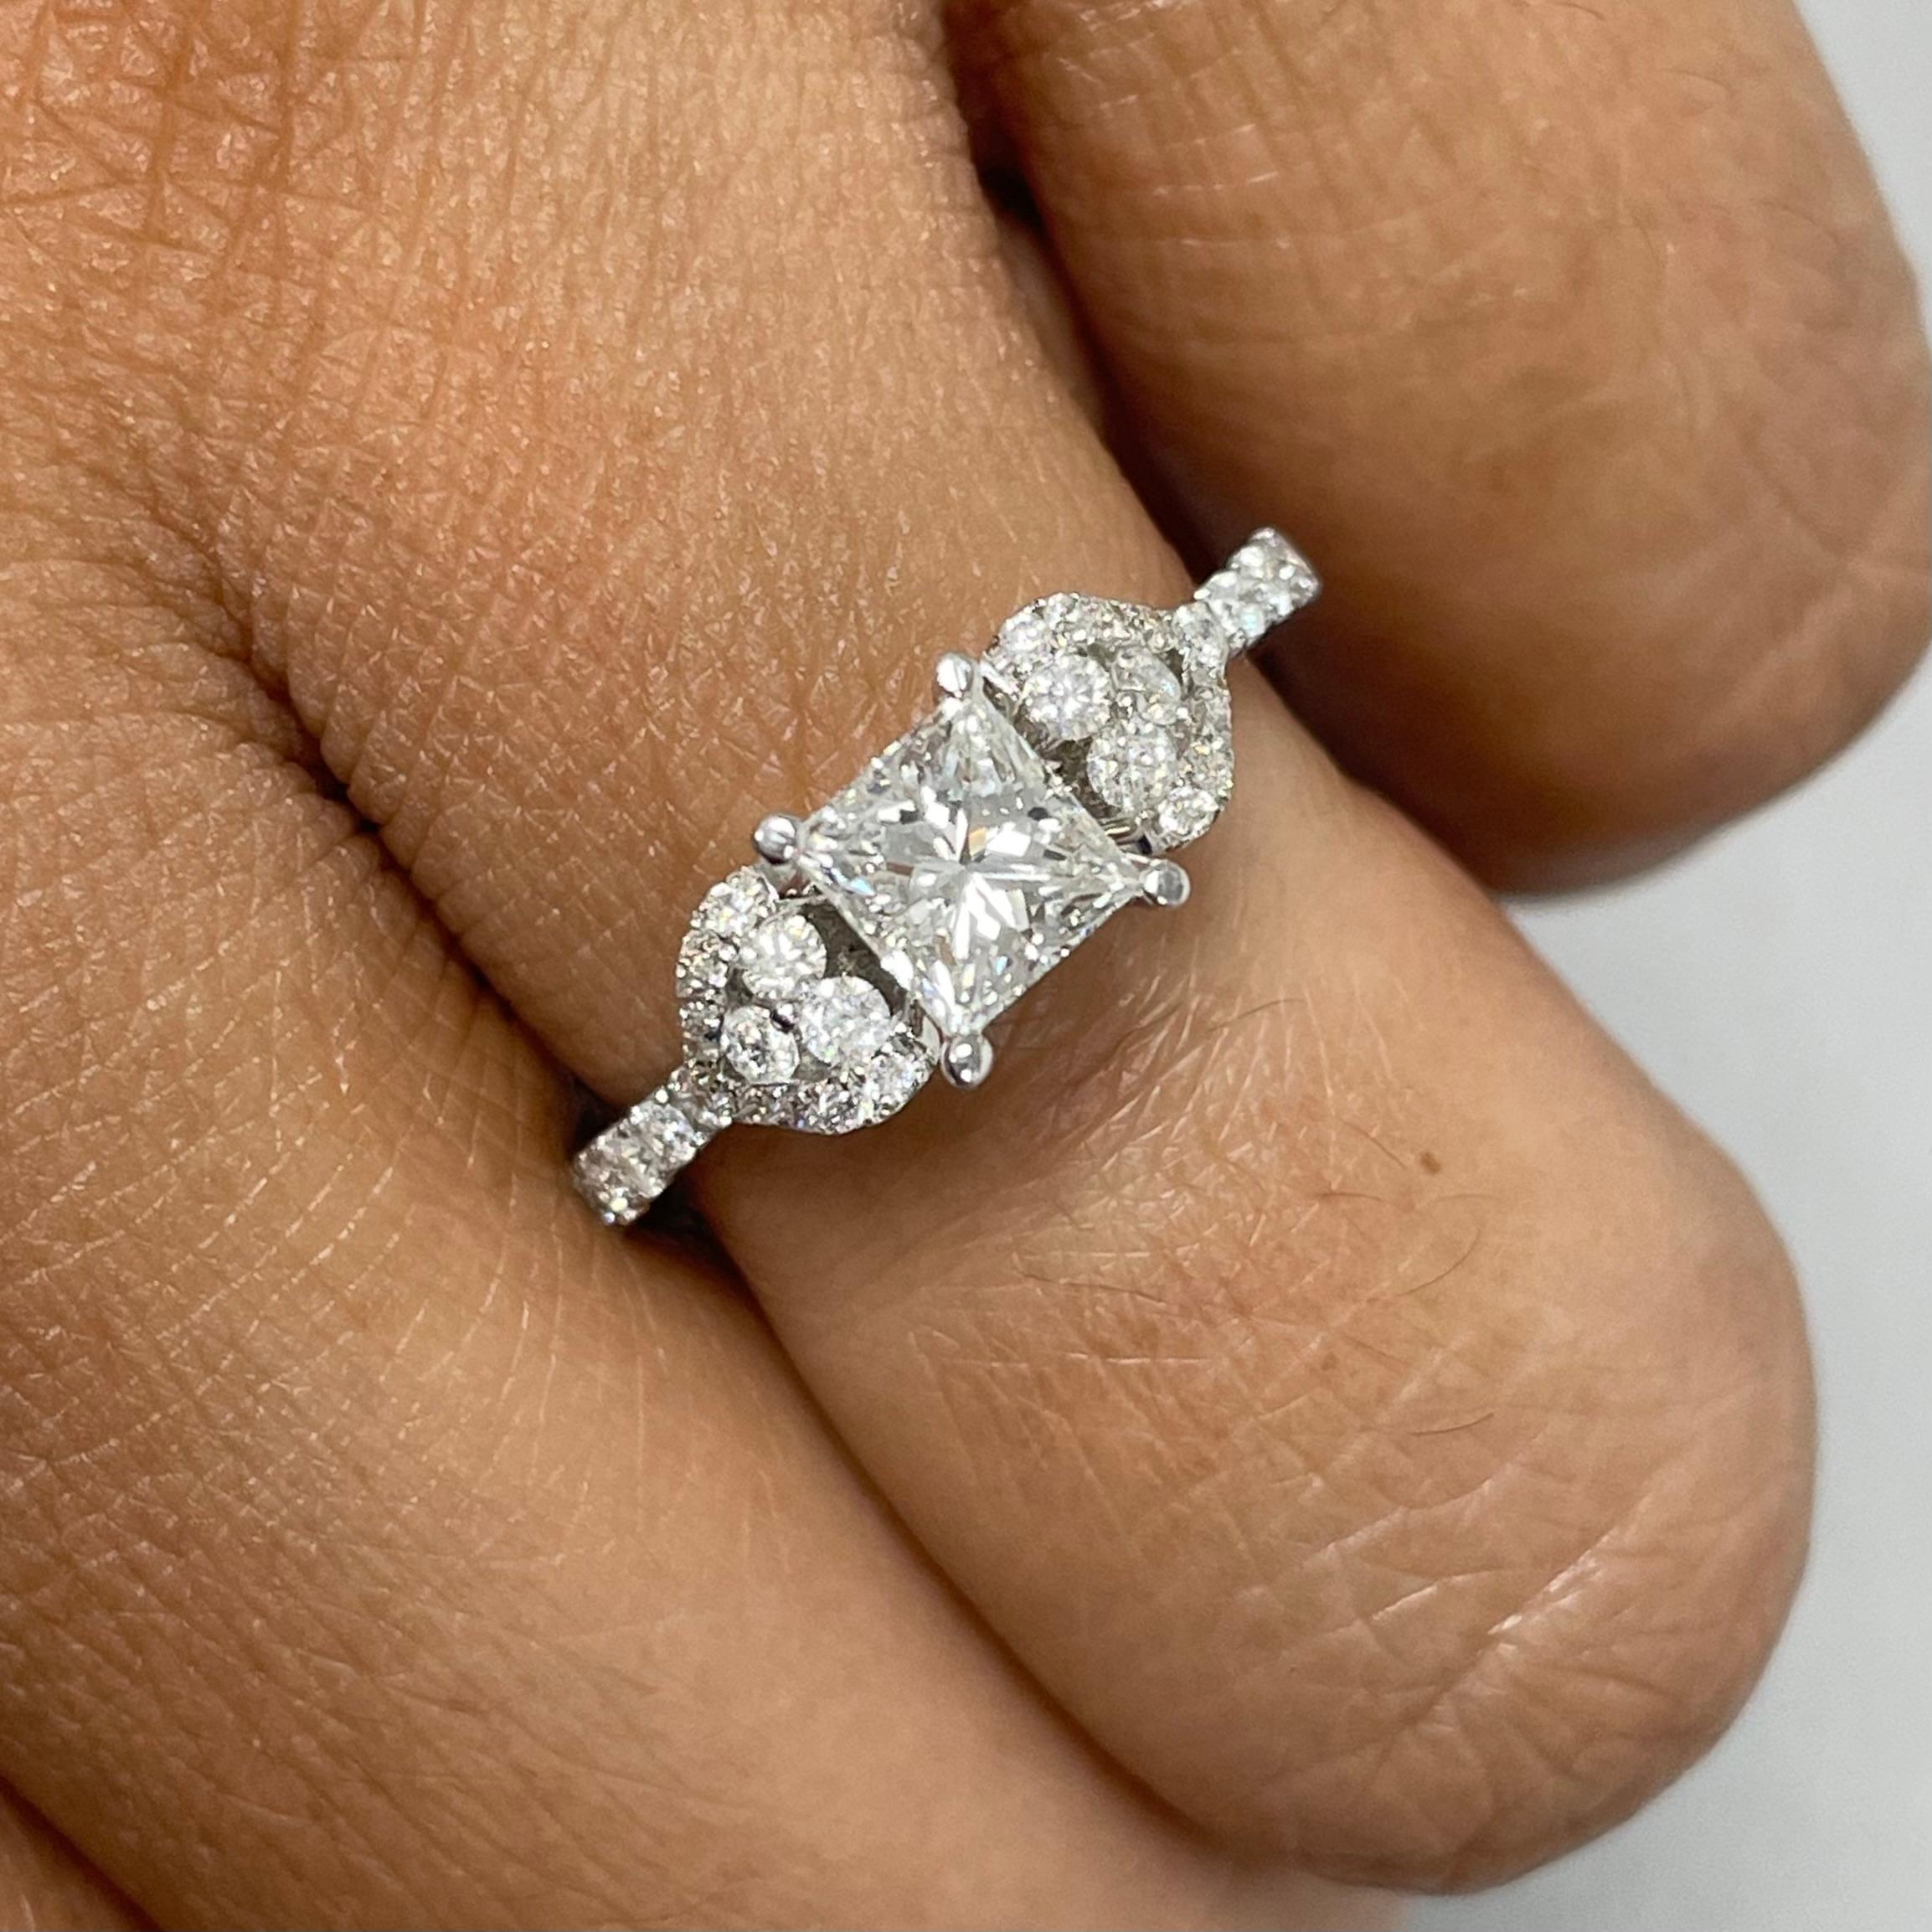 A testament of young love, this Princess engagement ring with heart like accents is symbolic of  promise and commitment. 

Center Diamond Shape: Princess Cut 
Center Diamond Weight: 0.71 ct 
Diamond Color: G 
Diamond Clarity: VS 

Side Diamonds